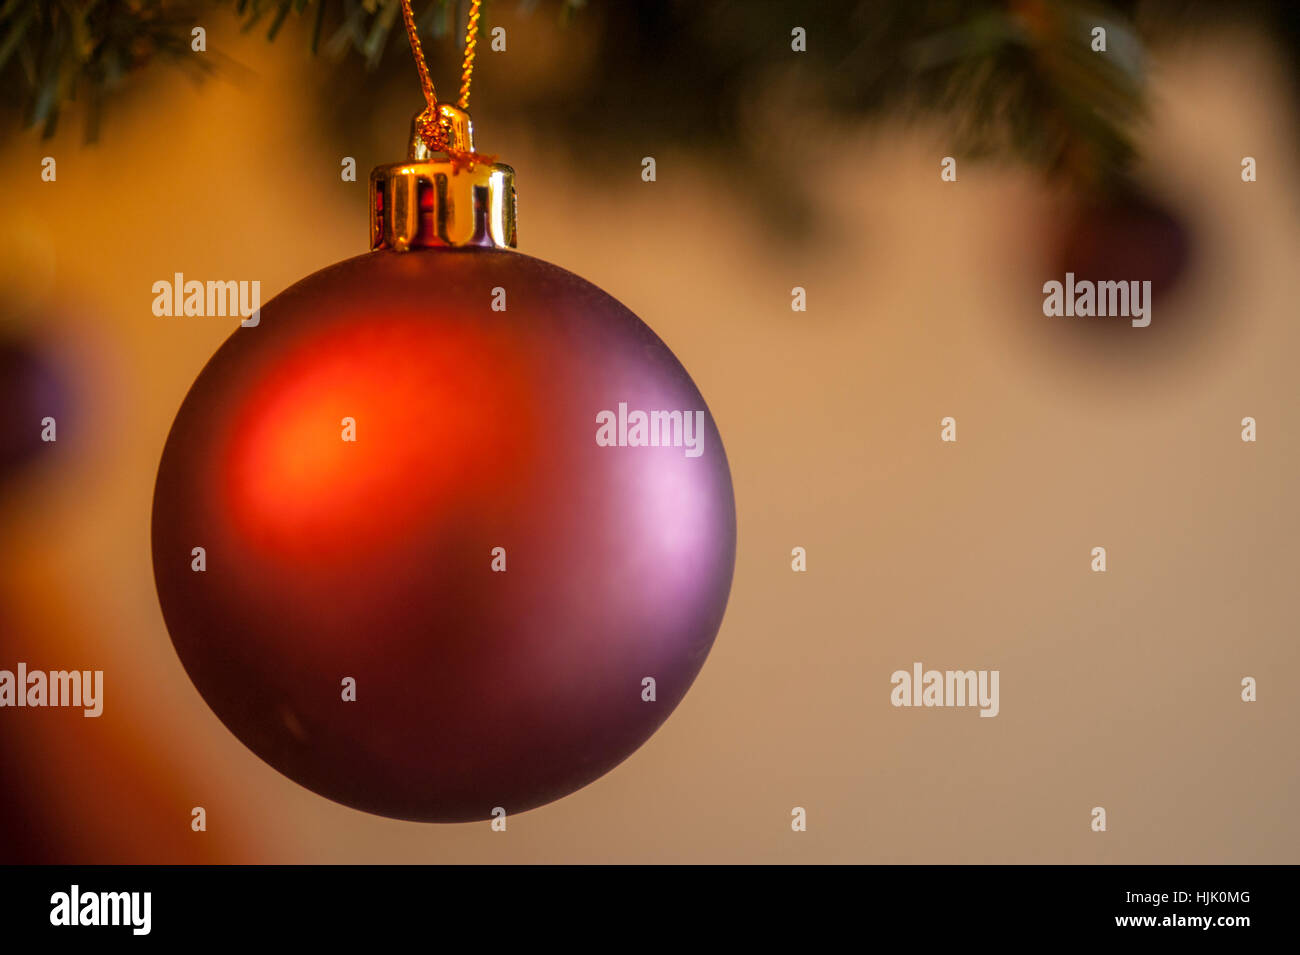 Red Christmas bauble hanging on a christmas tree. Stock Photo